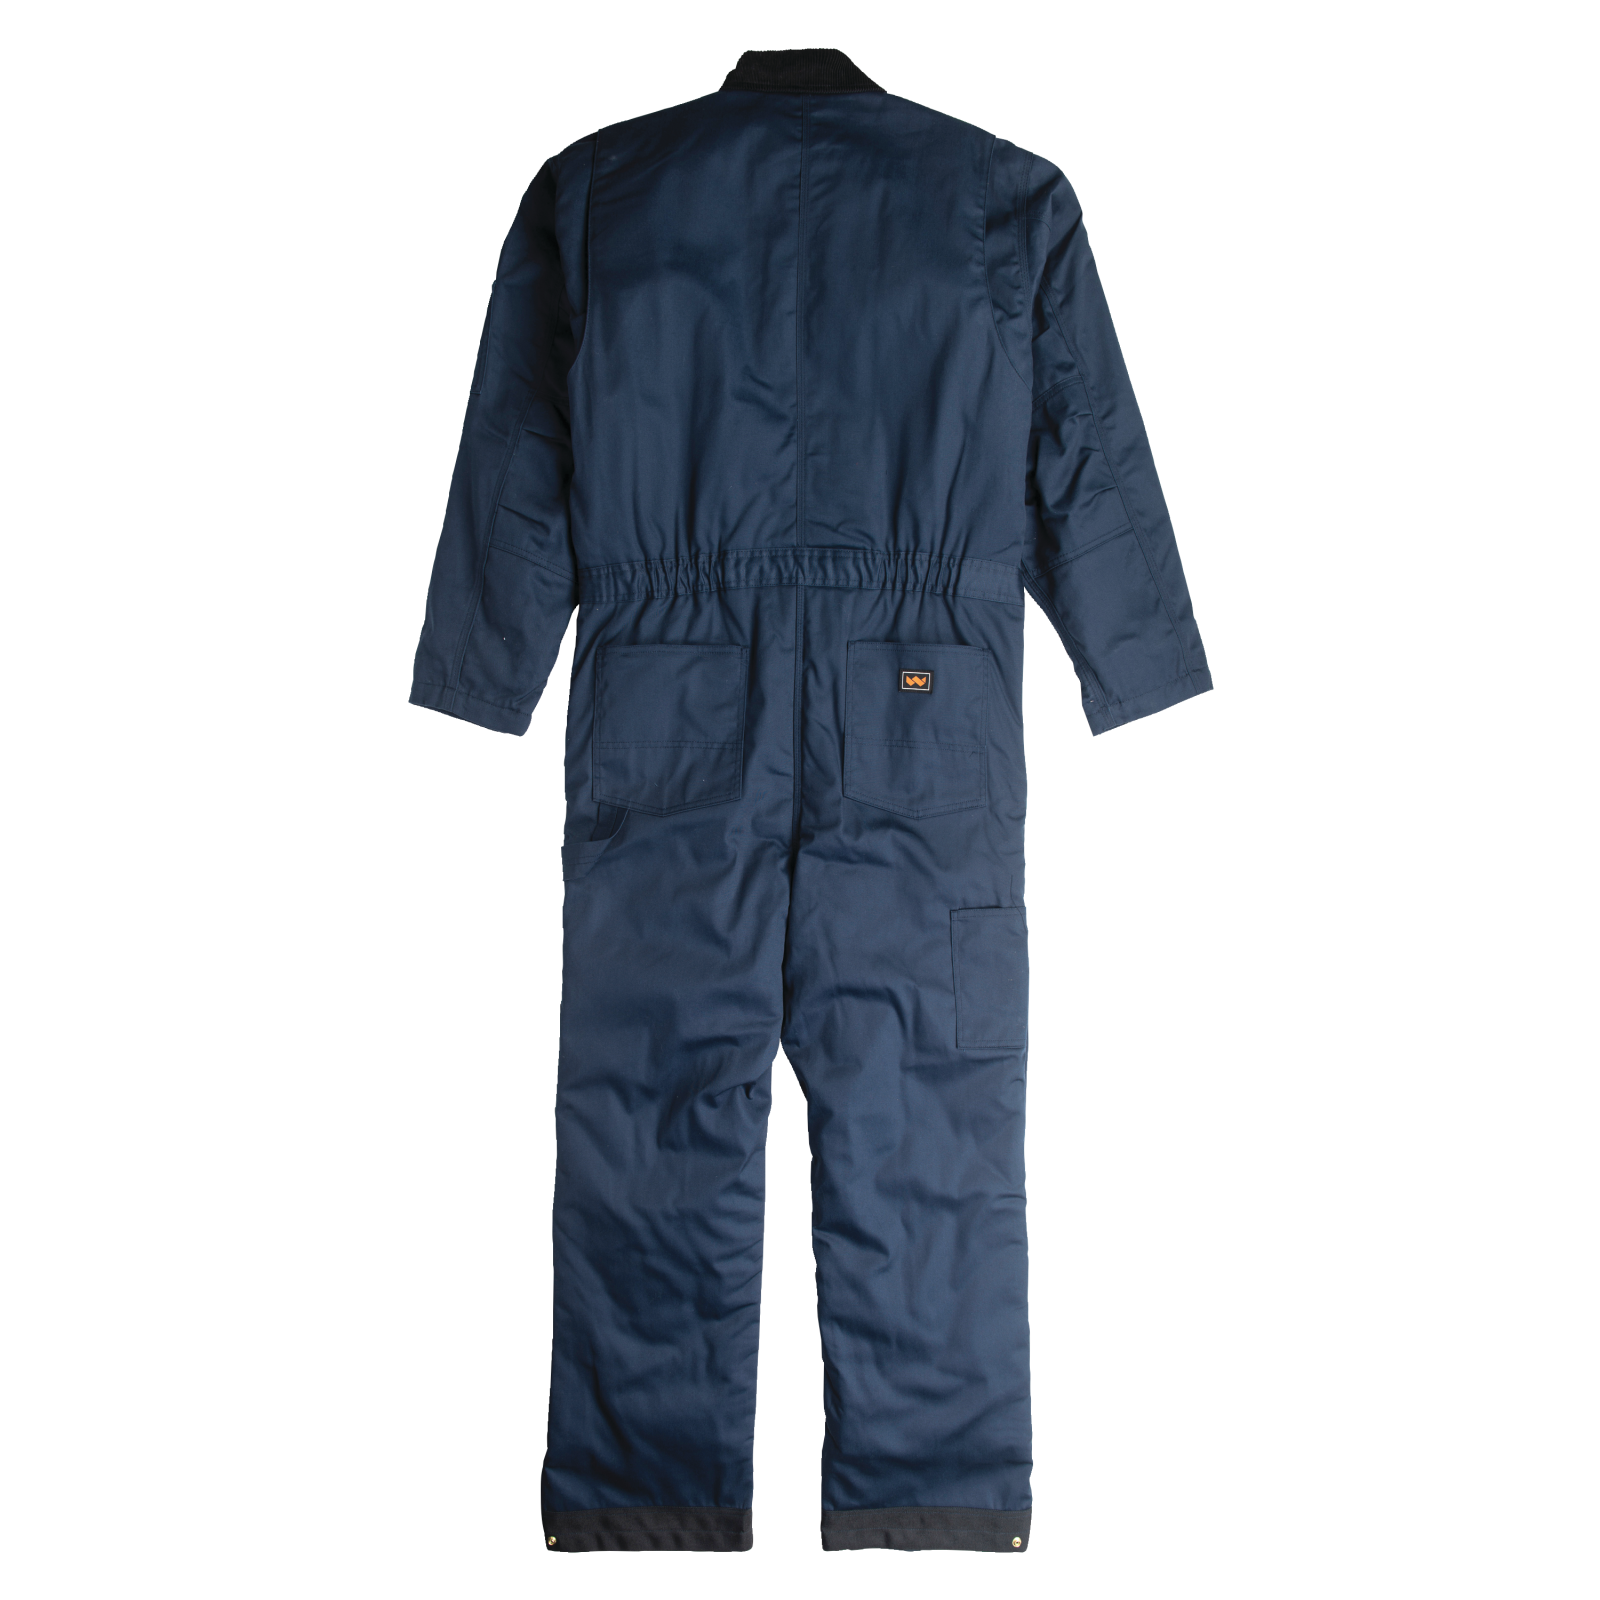 Garland Twill Insulated Work Coverall | Walls®